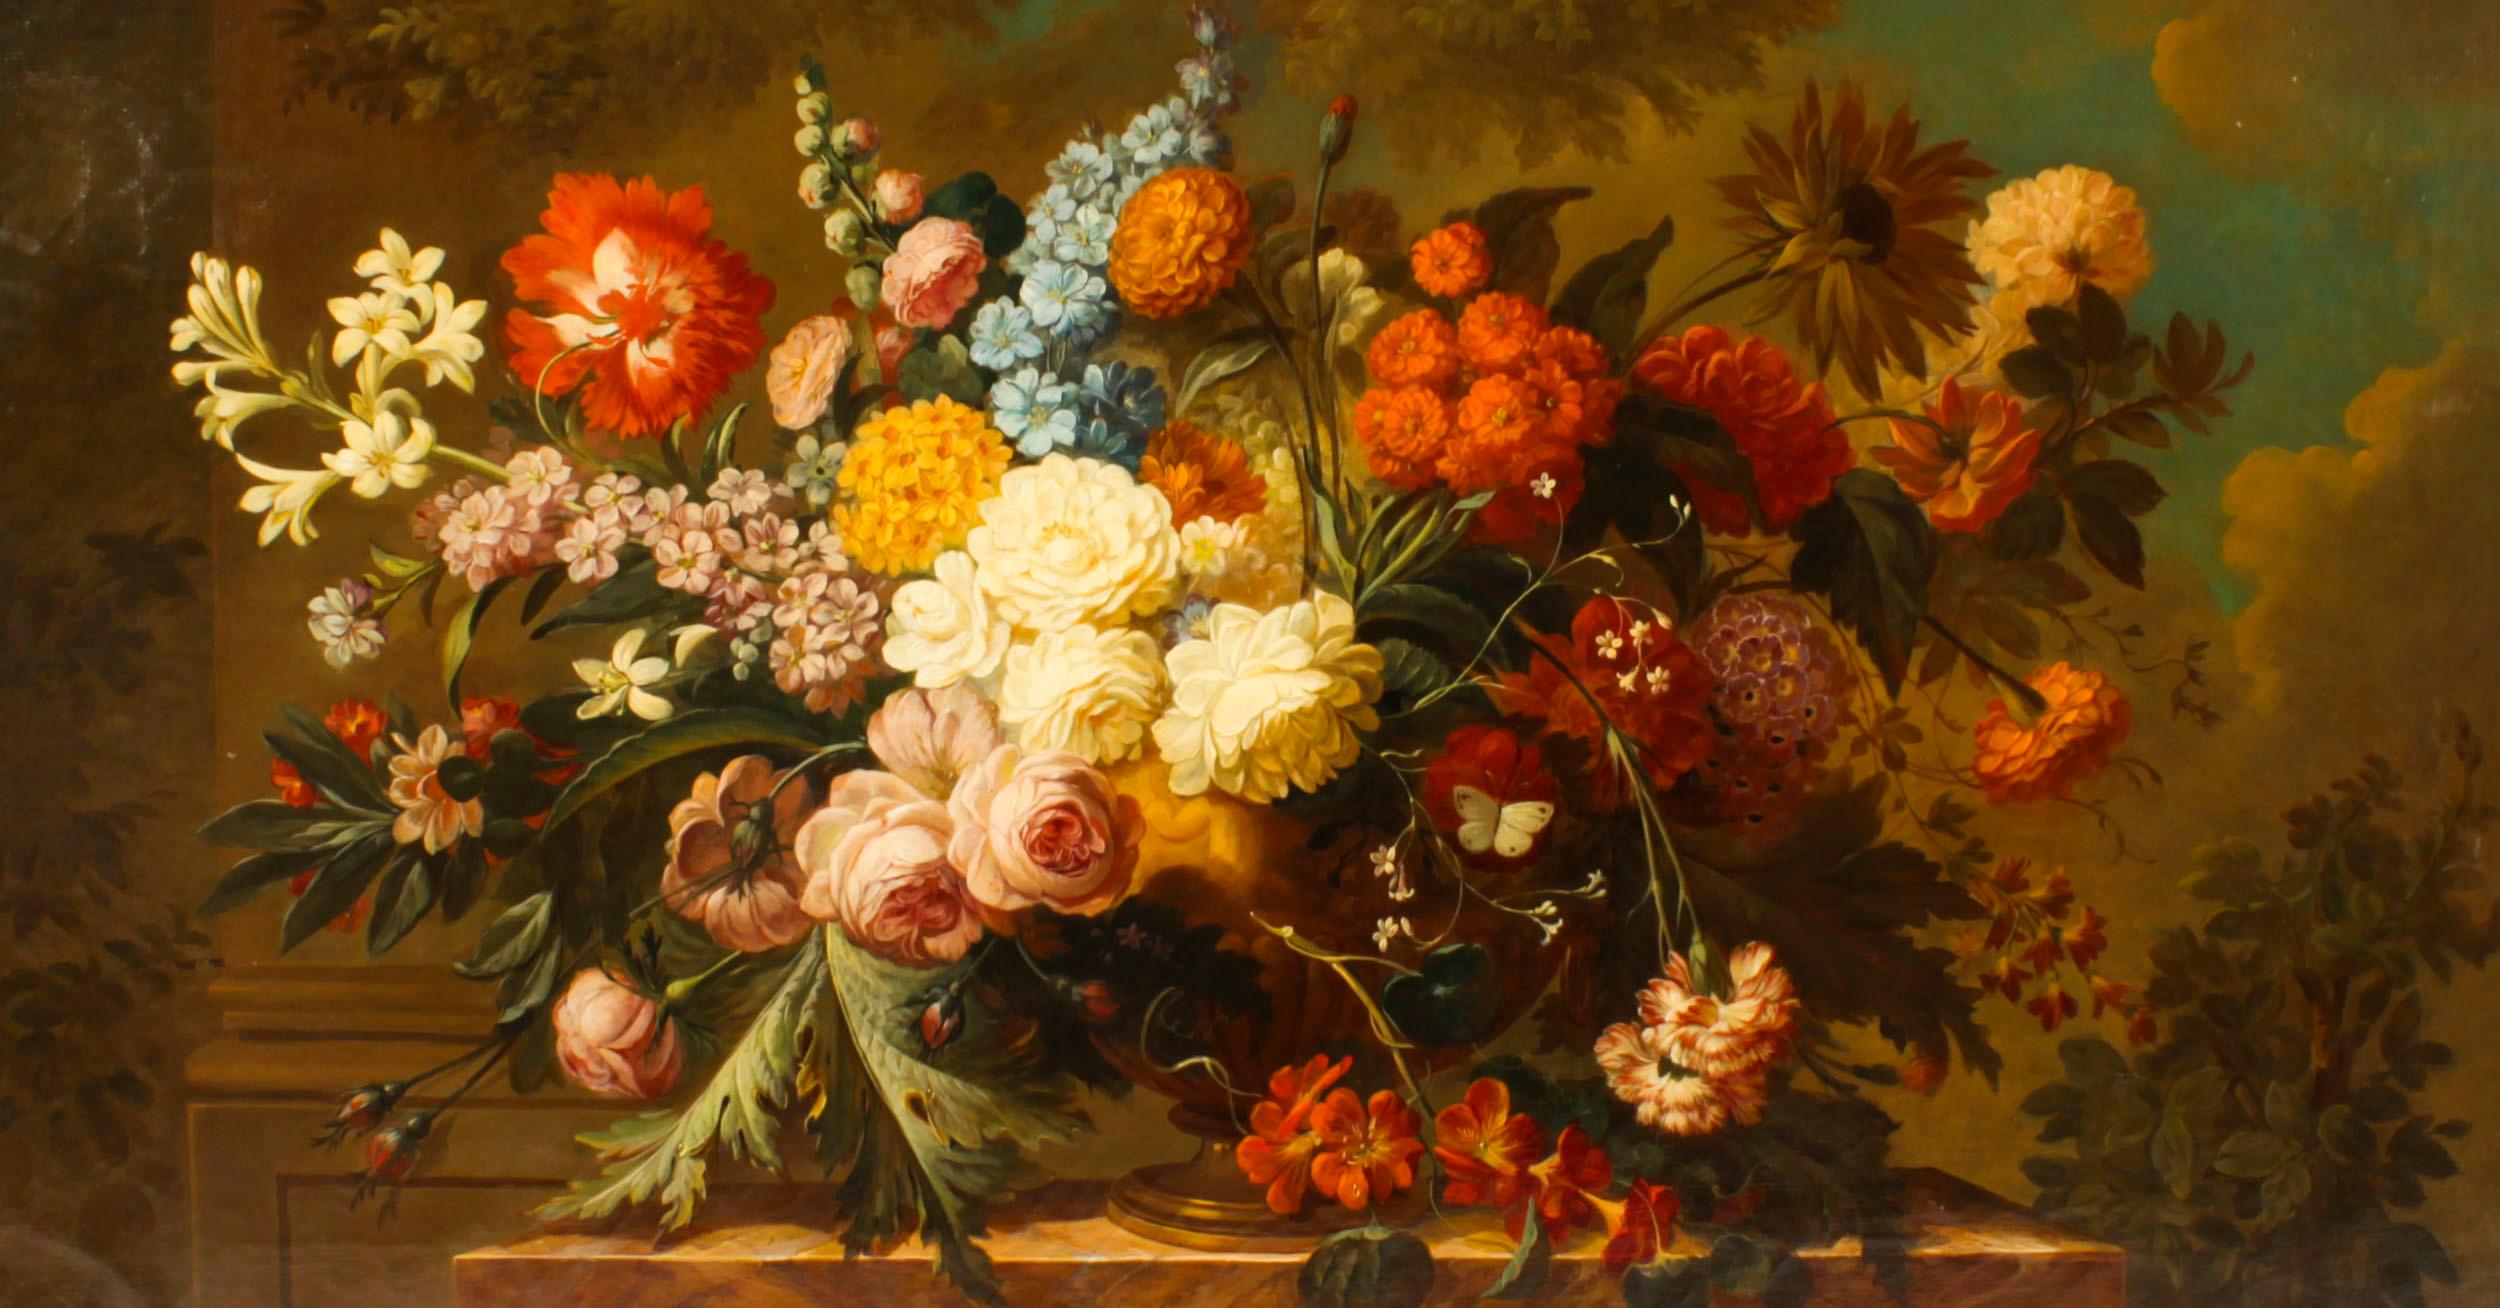 This is a magnificent monumental antique French school still life oil on canvas painting of a bouquet of flowers on a marble ledge, circa 1870 in date.

The large collection of brightly coloured summer flowers are arranged in a classical urn with a